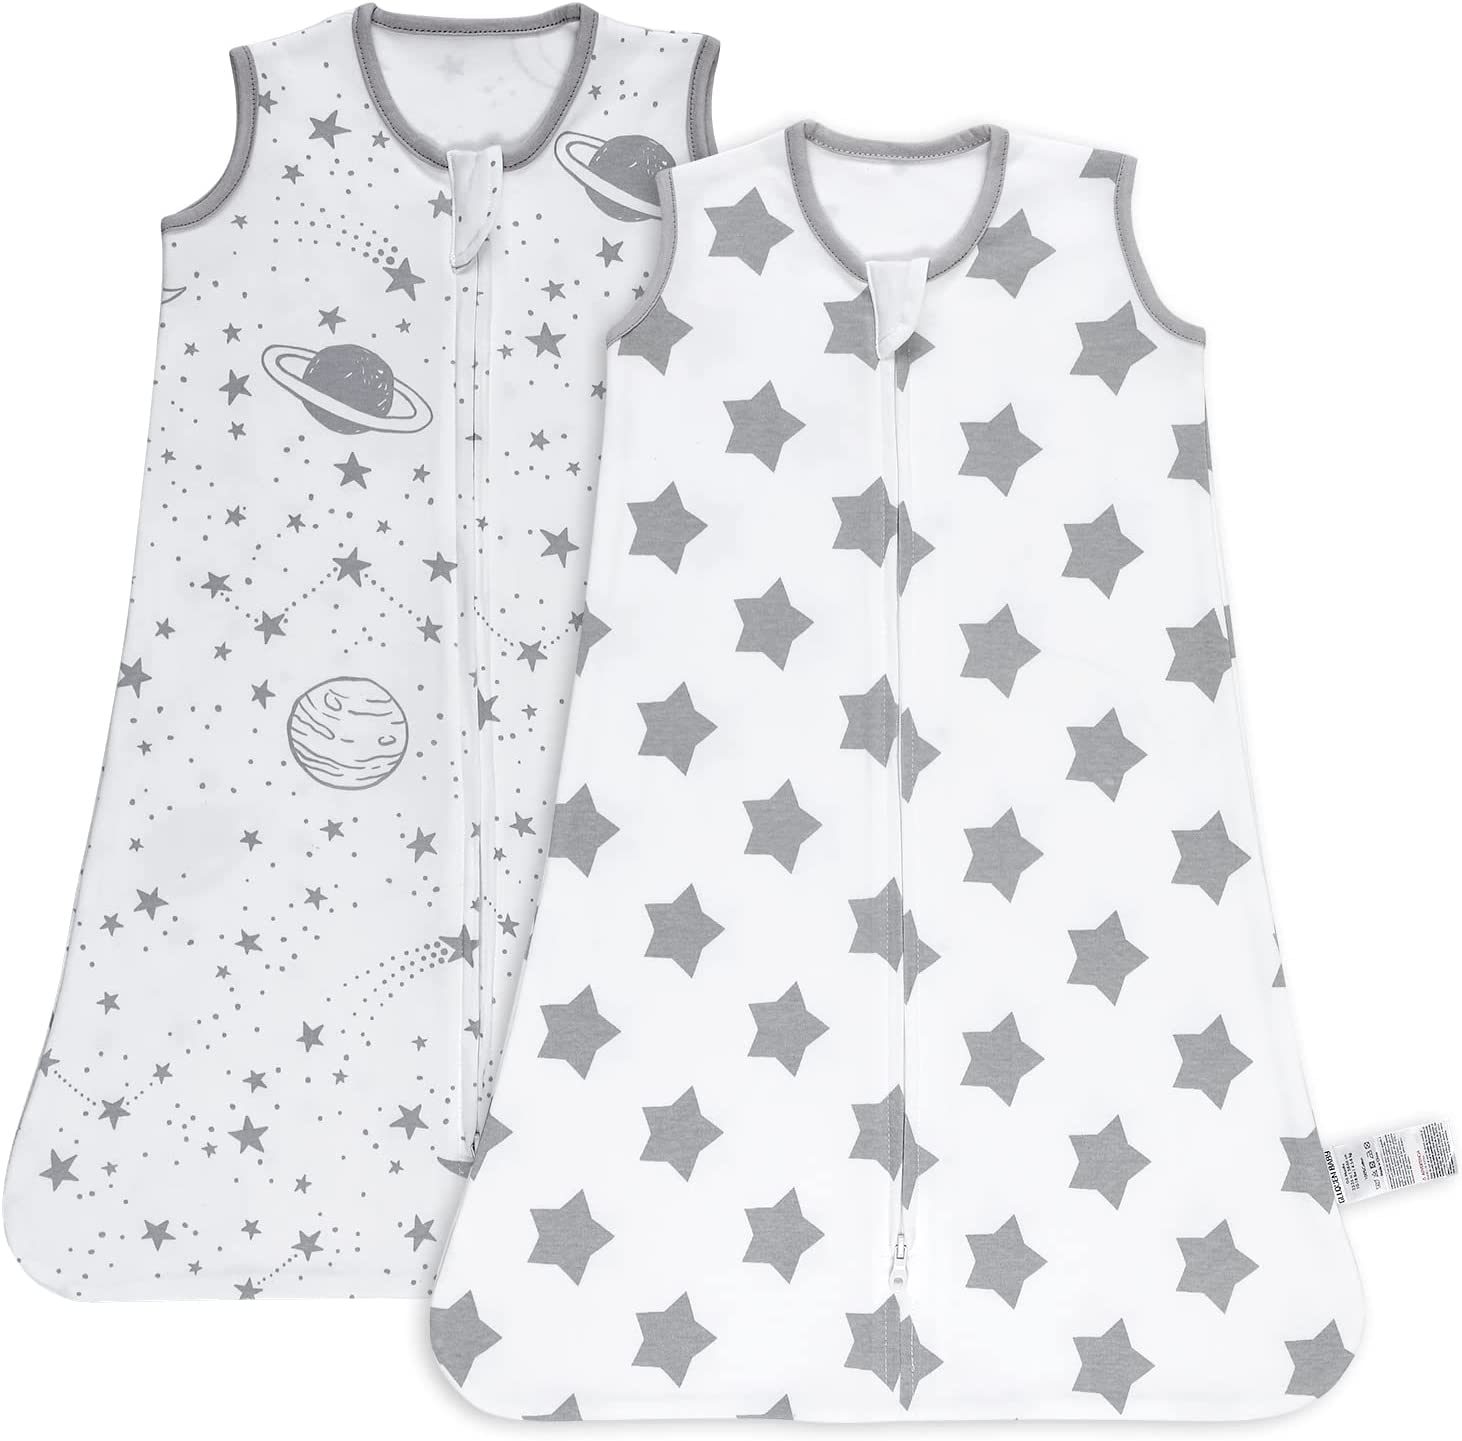 Planet & Star (Pack of 2)